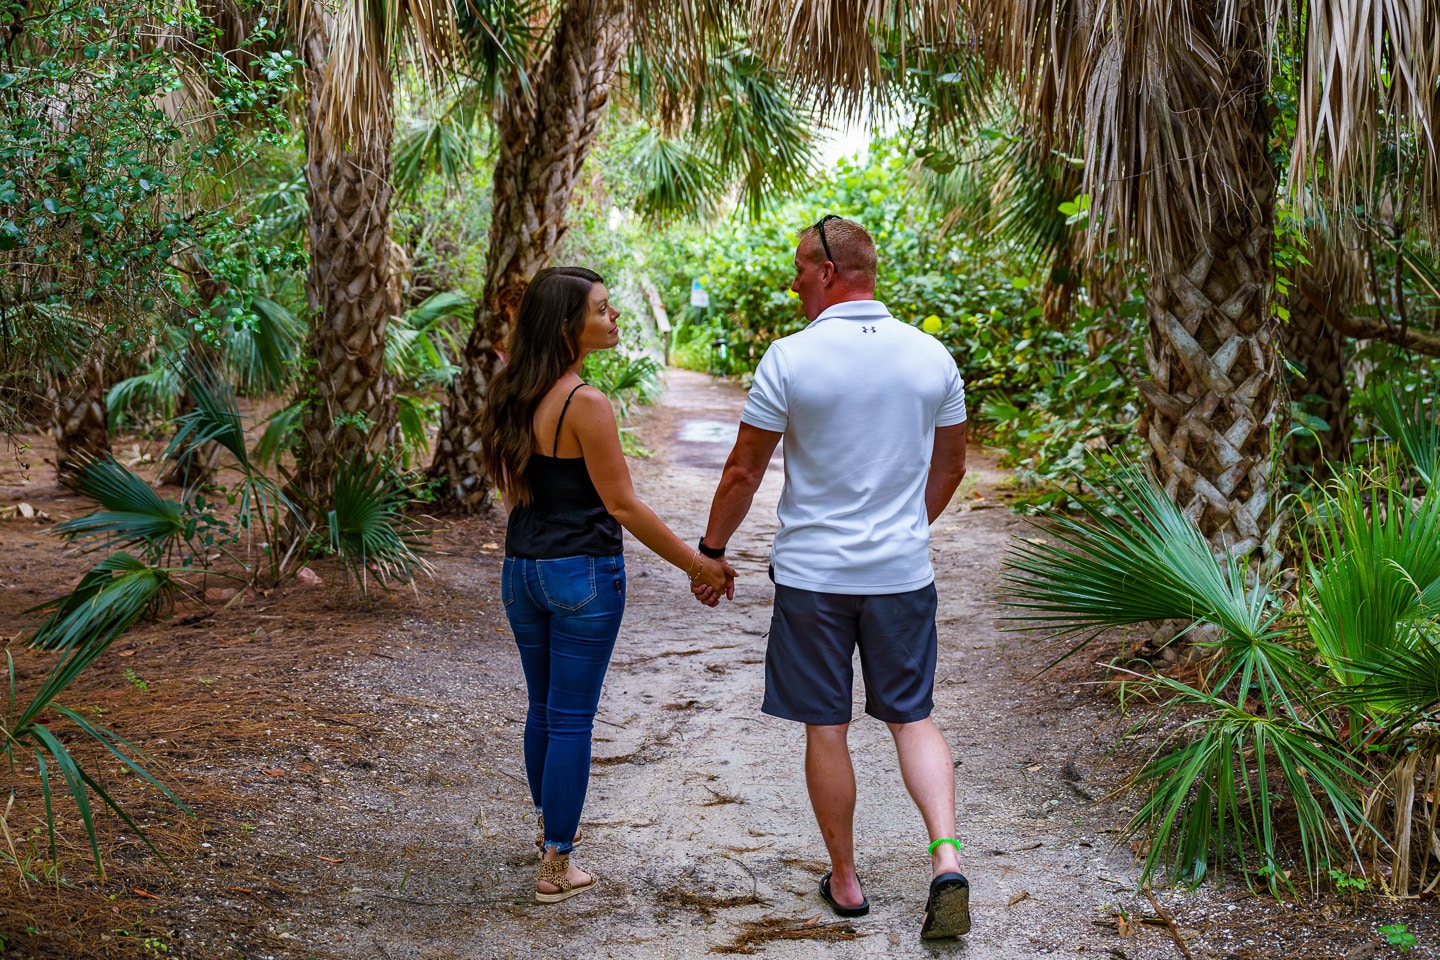 Couple holding hands on a serene nature trail surrounded by lush palms.